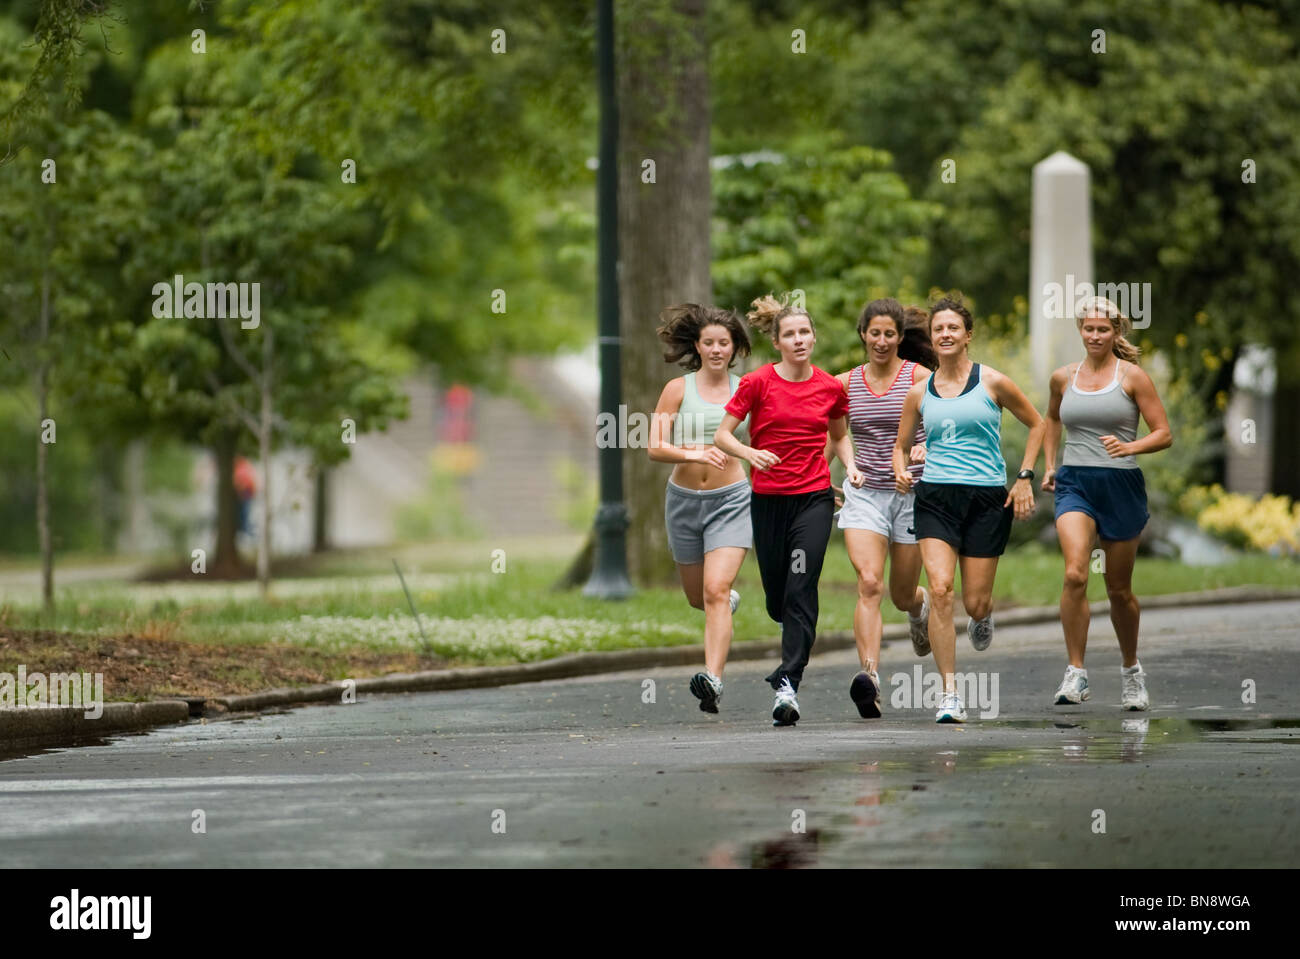 Runners jogging in park Stock Photo